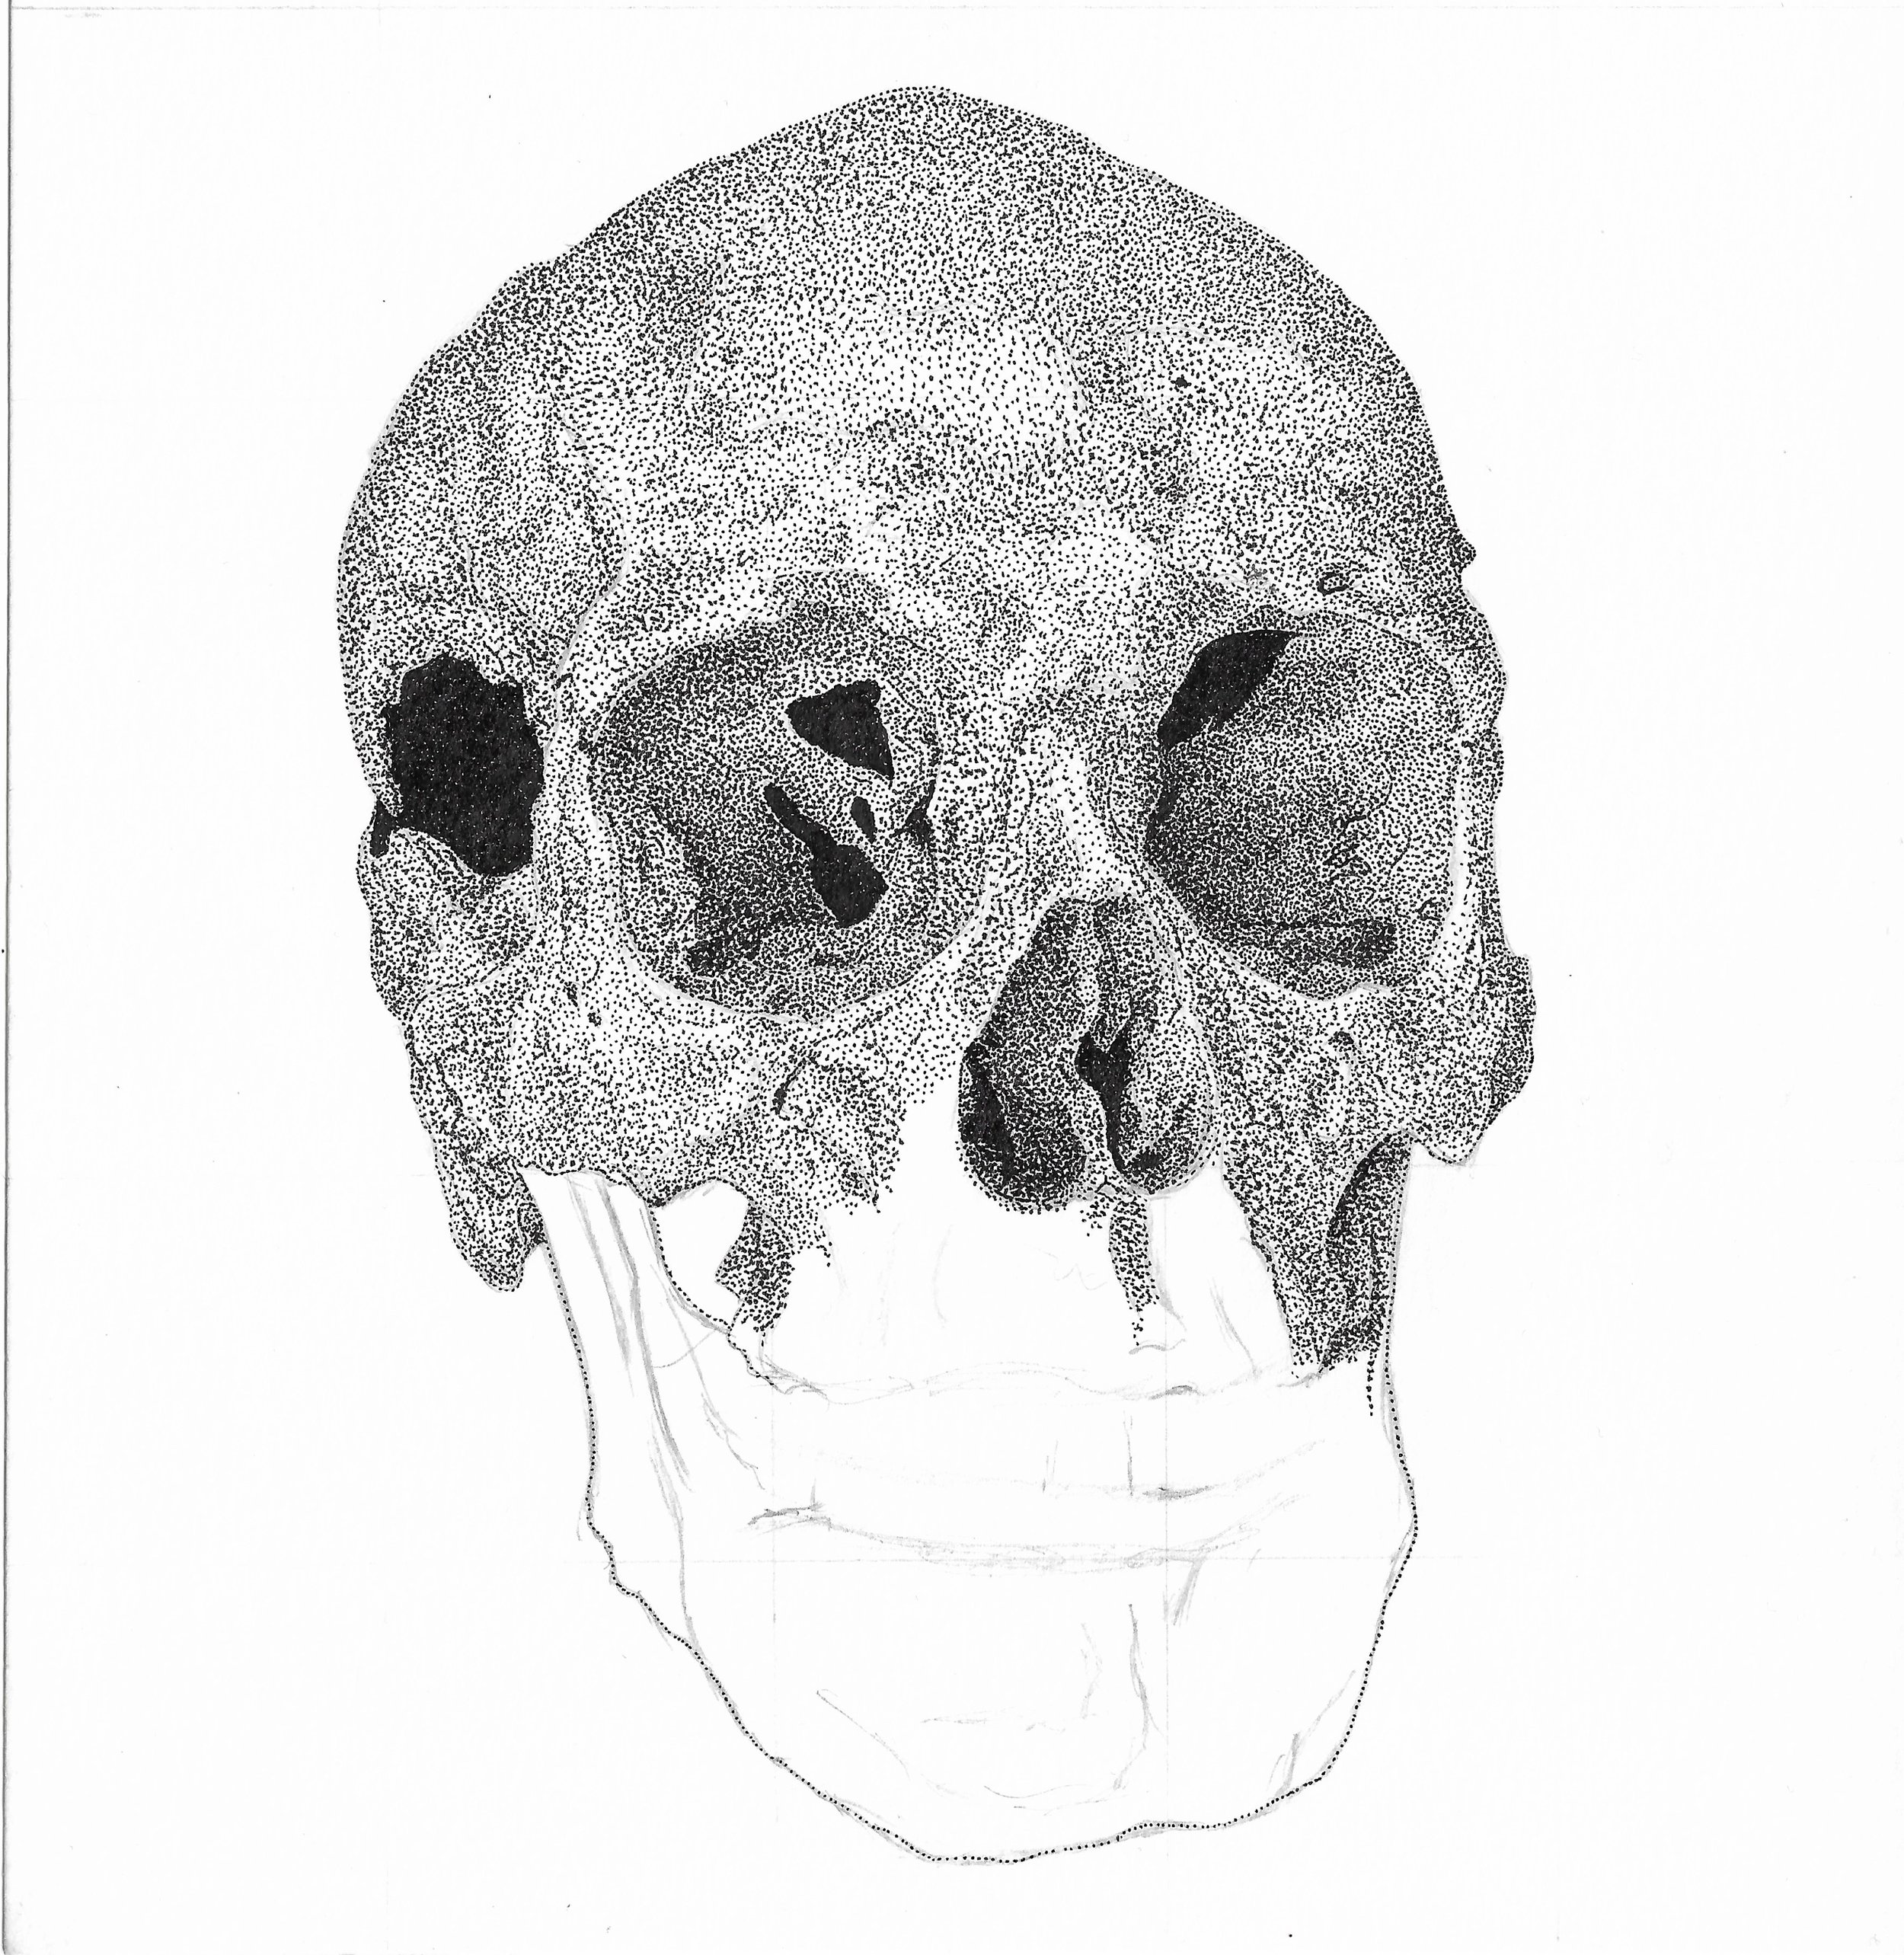 Skull with Bullet Wounds, 2021-22